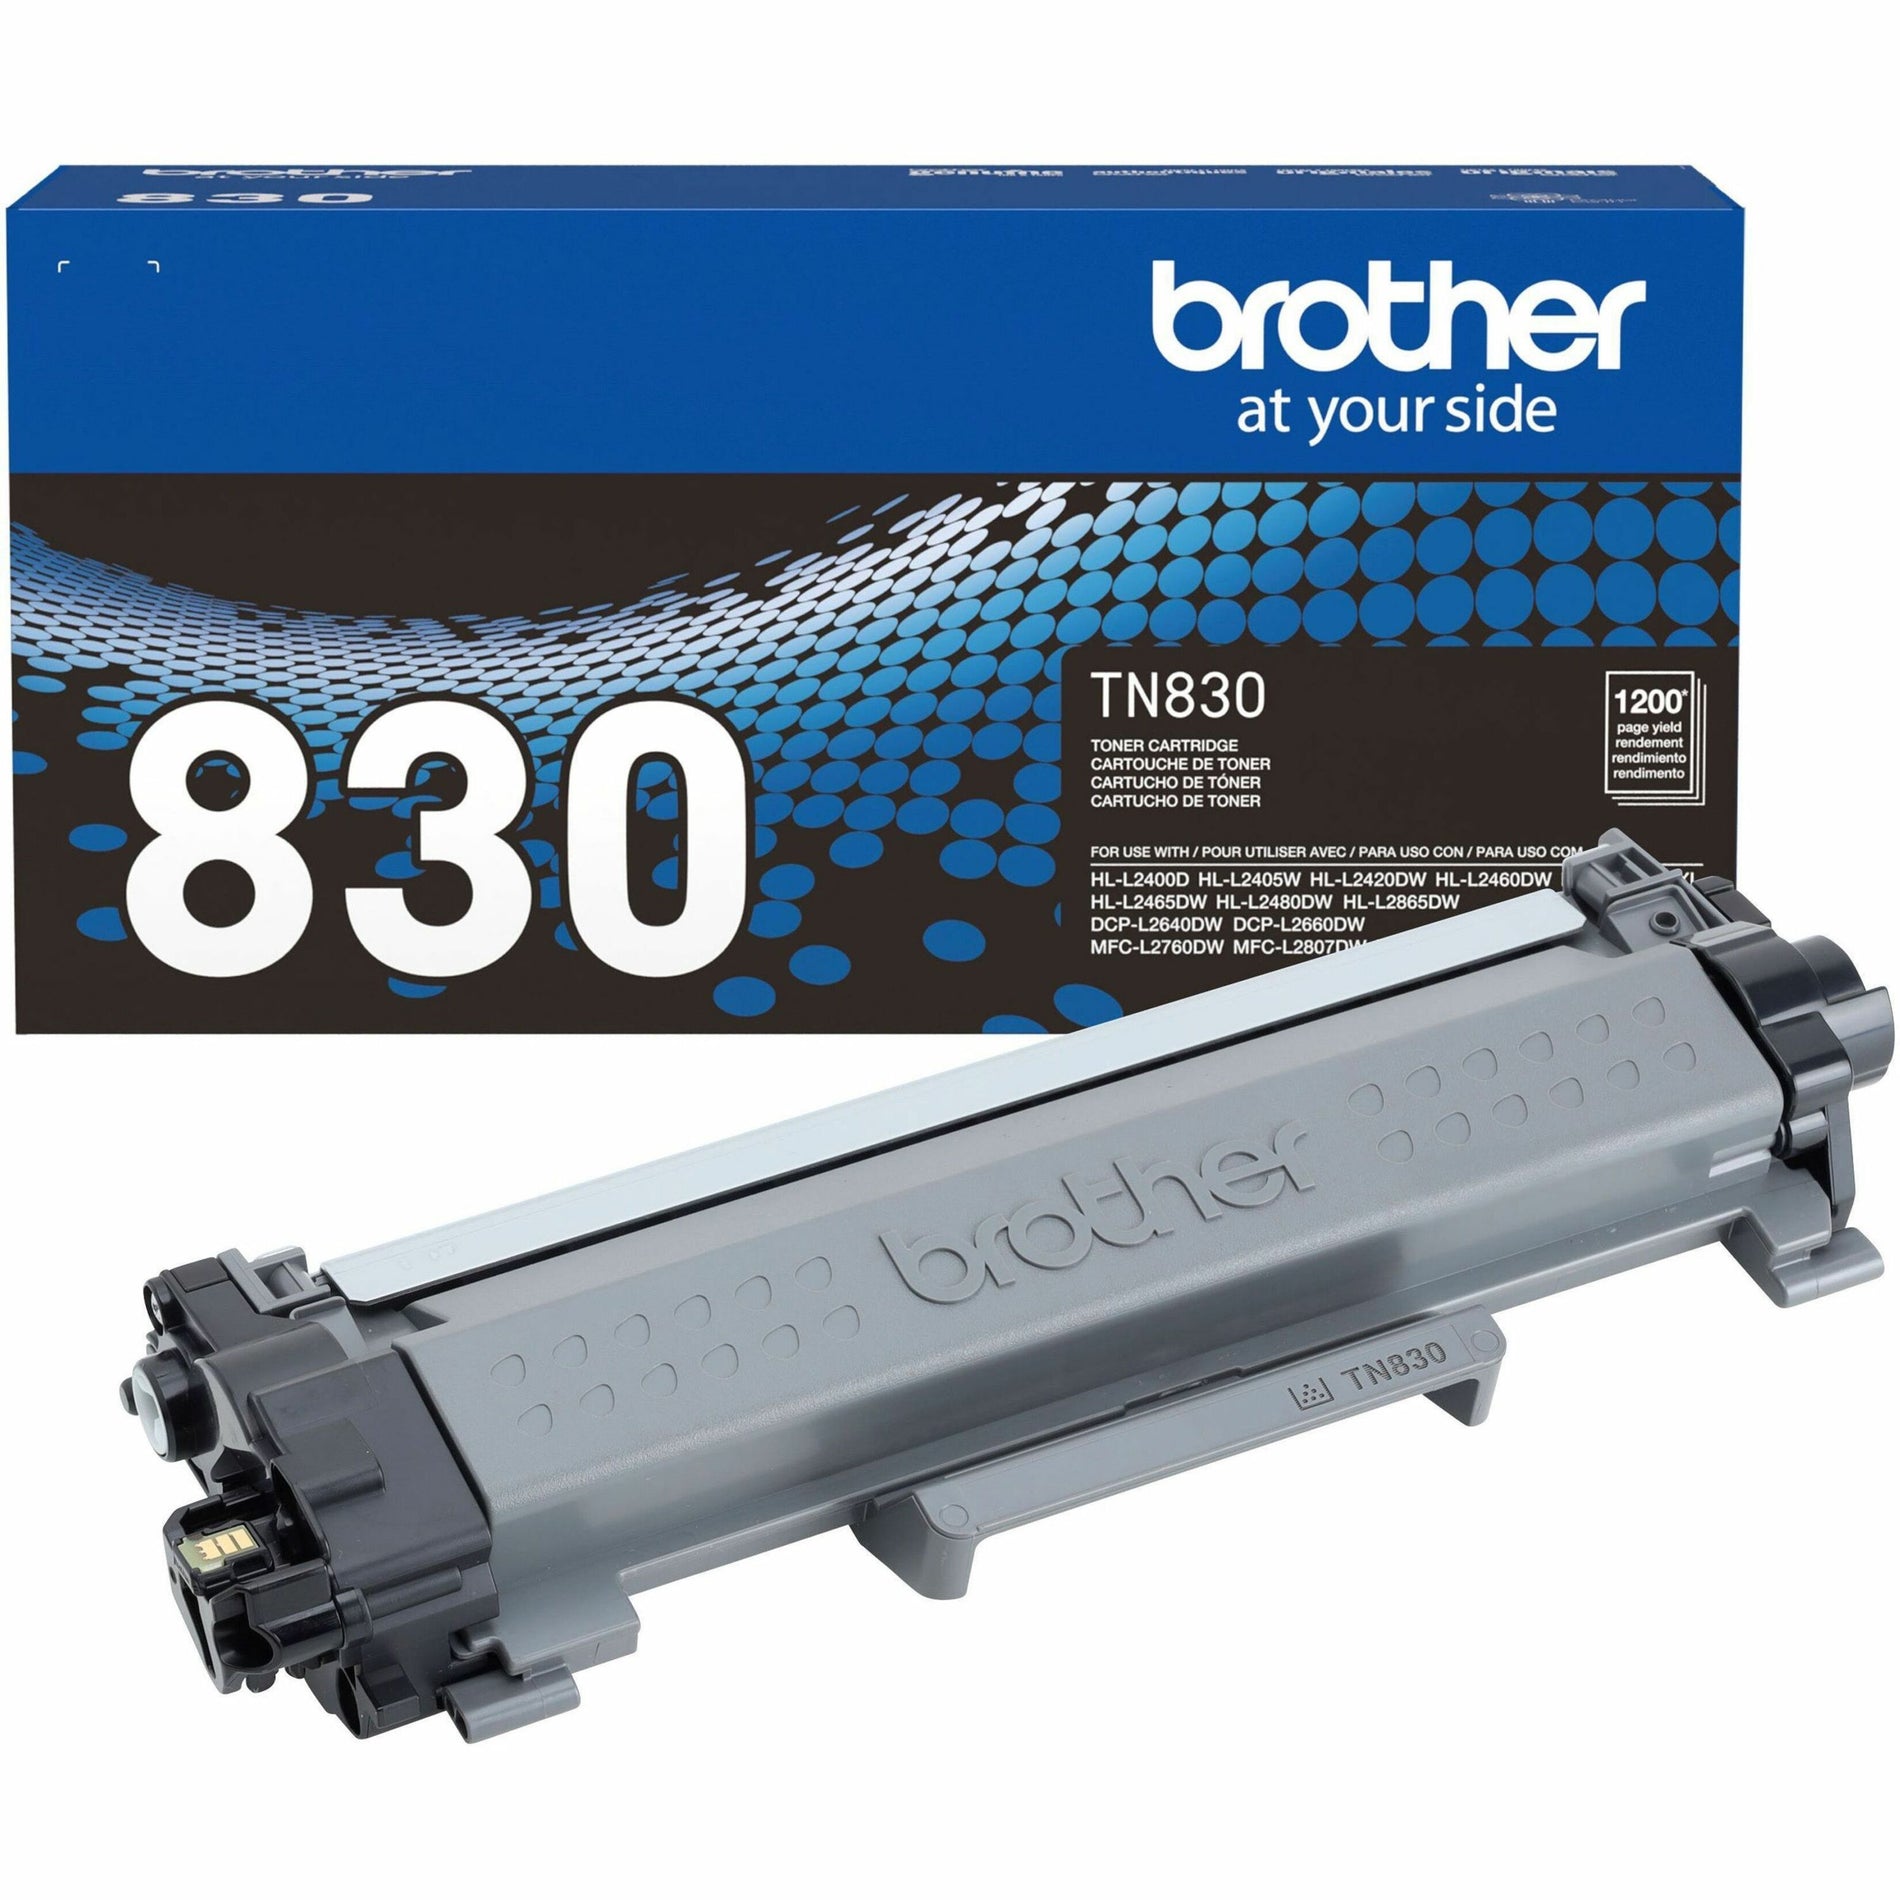 Brother TN830 TN380XL Genuine Toner Cartridge, 1200 Pages Yield, Black